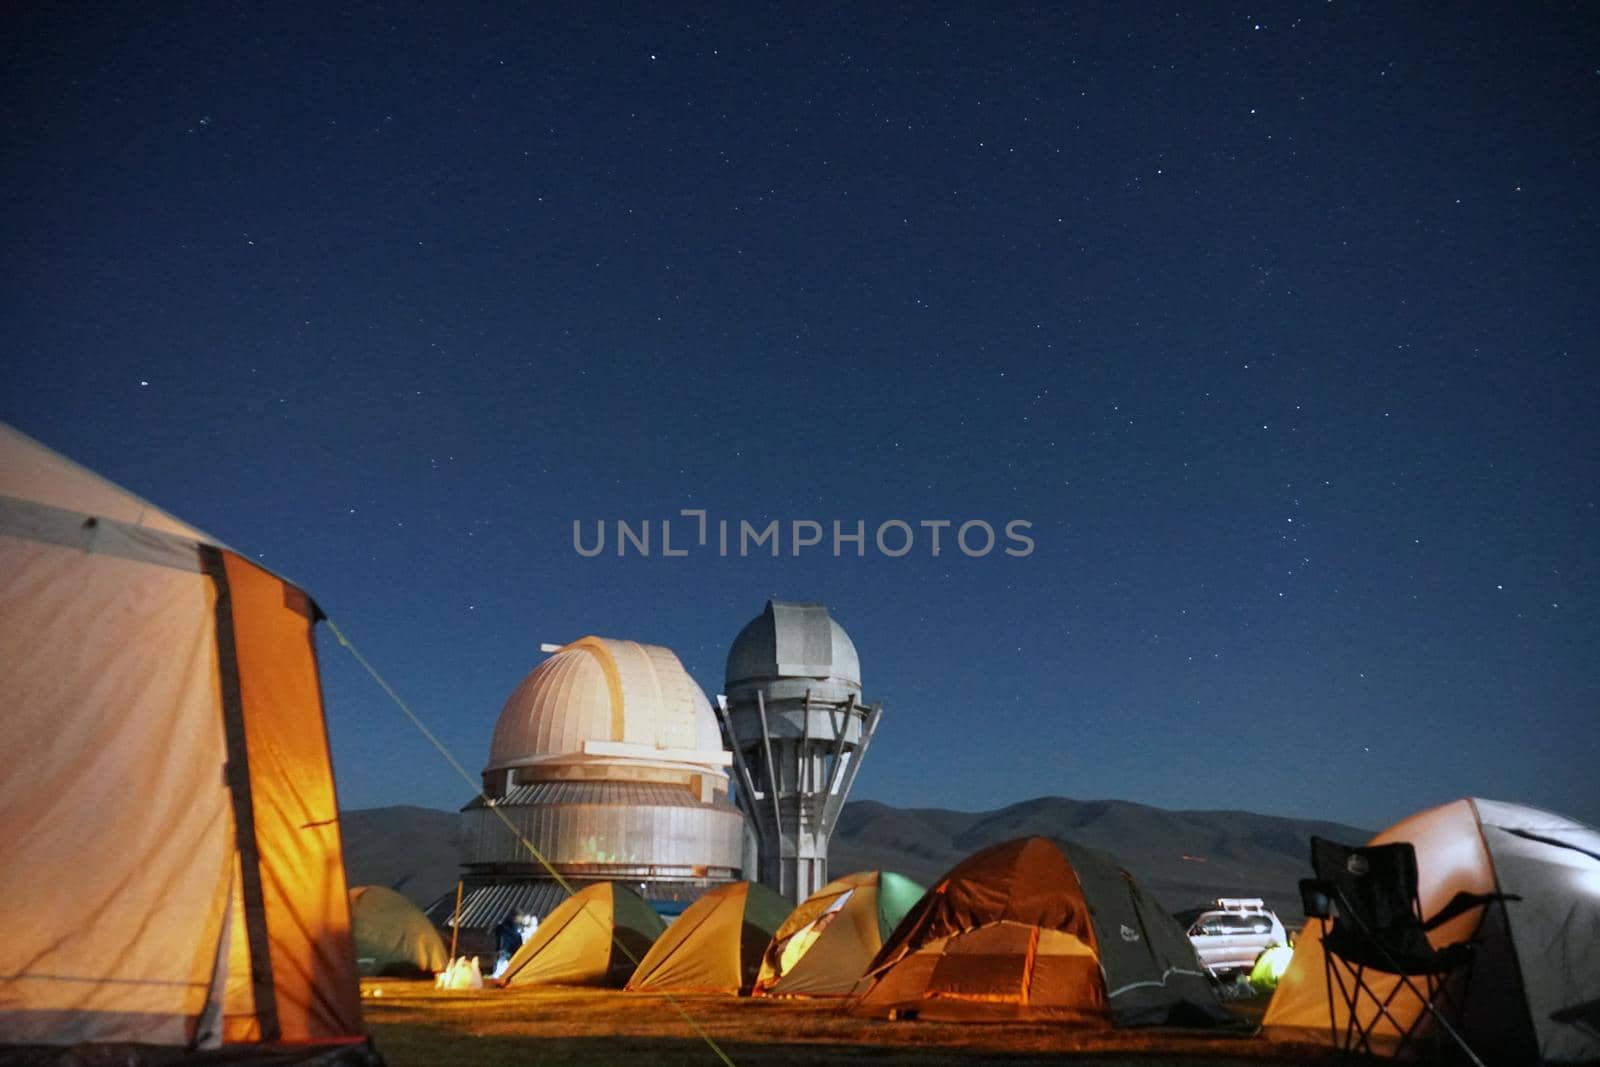 A tent camp near the observatory. Perseid starfall by Passcal